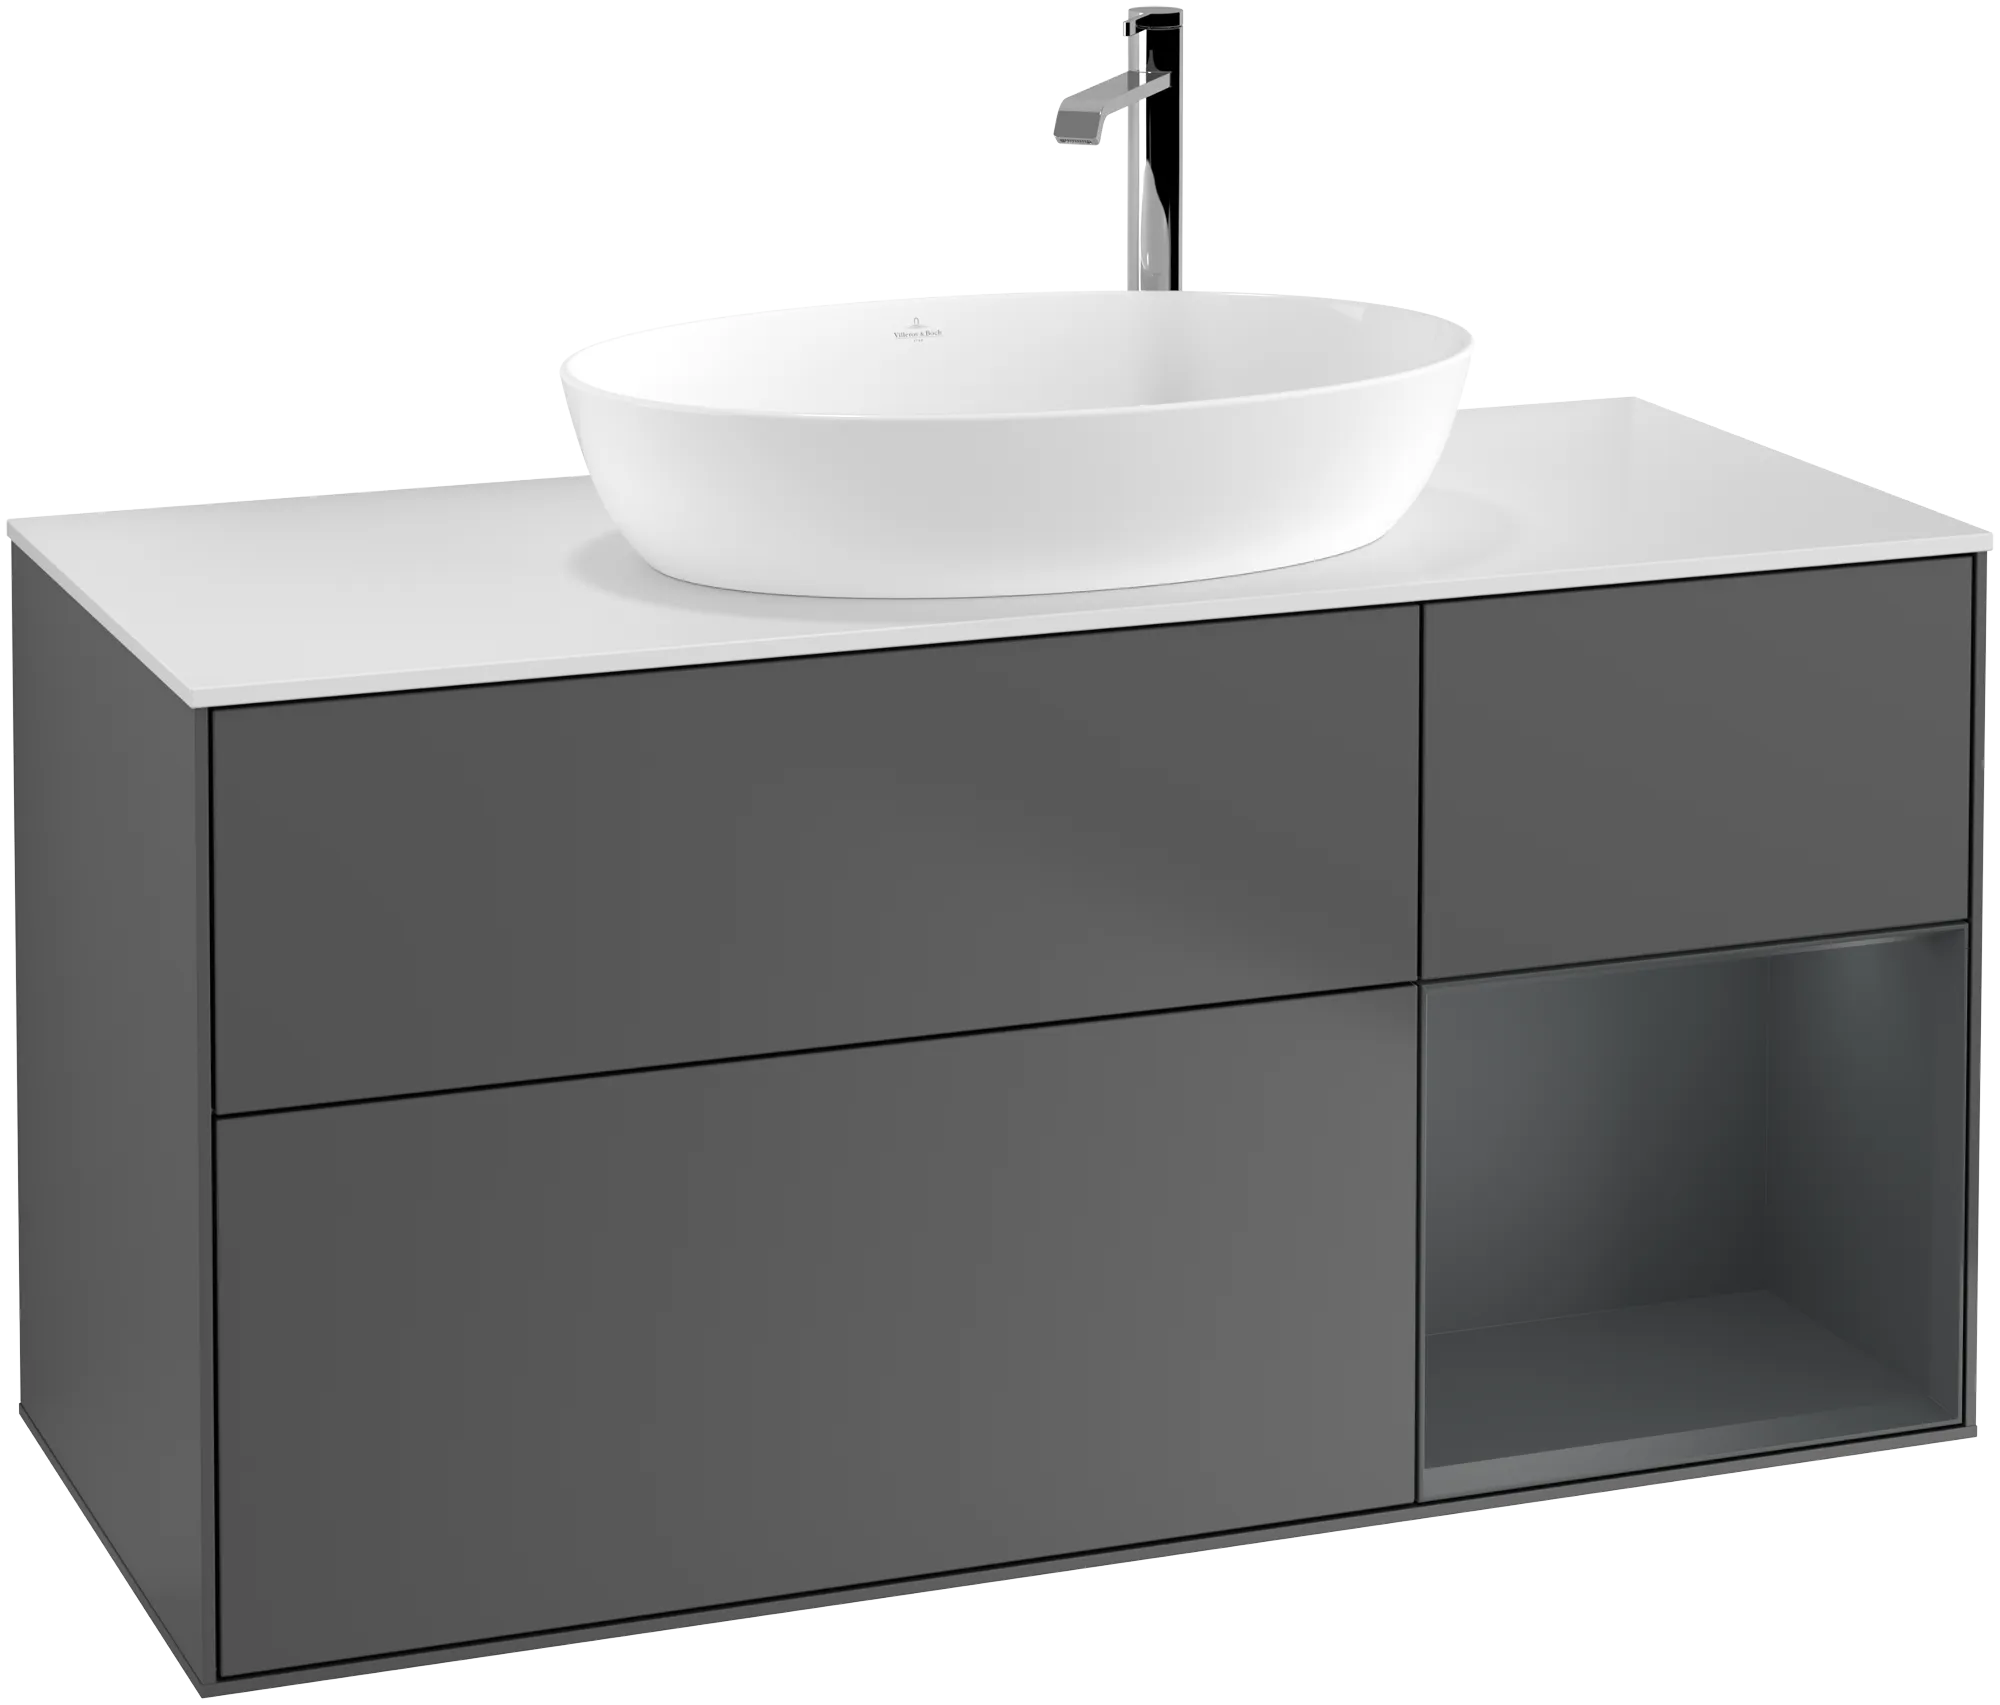 VILLEROY BOCH Finion Vanity unit, with lighting, 3 pull-out compartments, 1200 x 603 x 501 mm, Anthracite Matt Lacquer / Midnight Blue Matt Lacquer / Glass White Matt #G951HGGK resmi